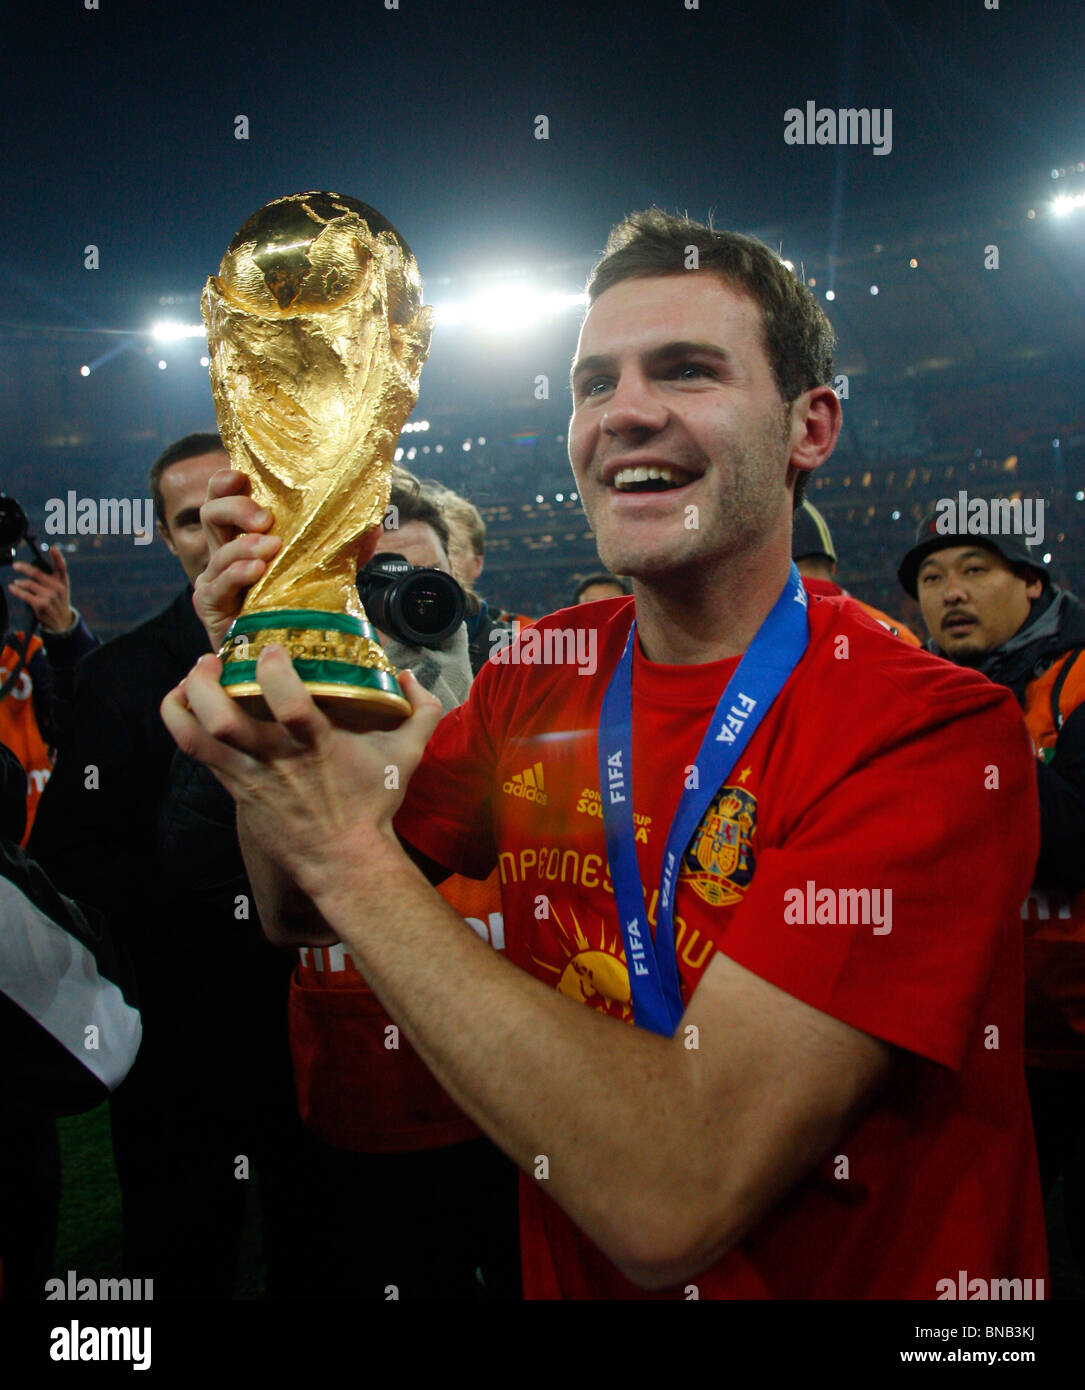 JUAN MANUEL MATA WITH THE WORL NETHERLANDS V SPAIN SOCCER CITY JOHANNESBURG SOUTH AFRICA 11 July 2010 Stock Photo